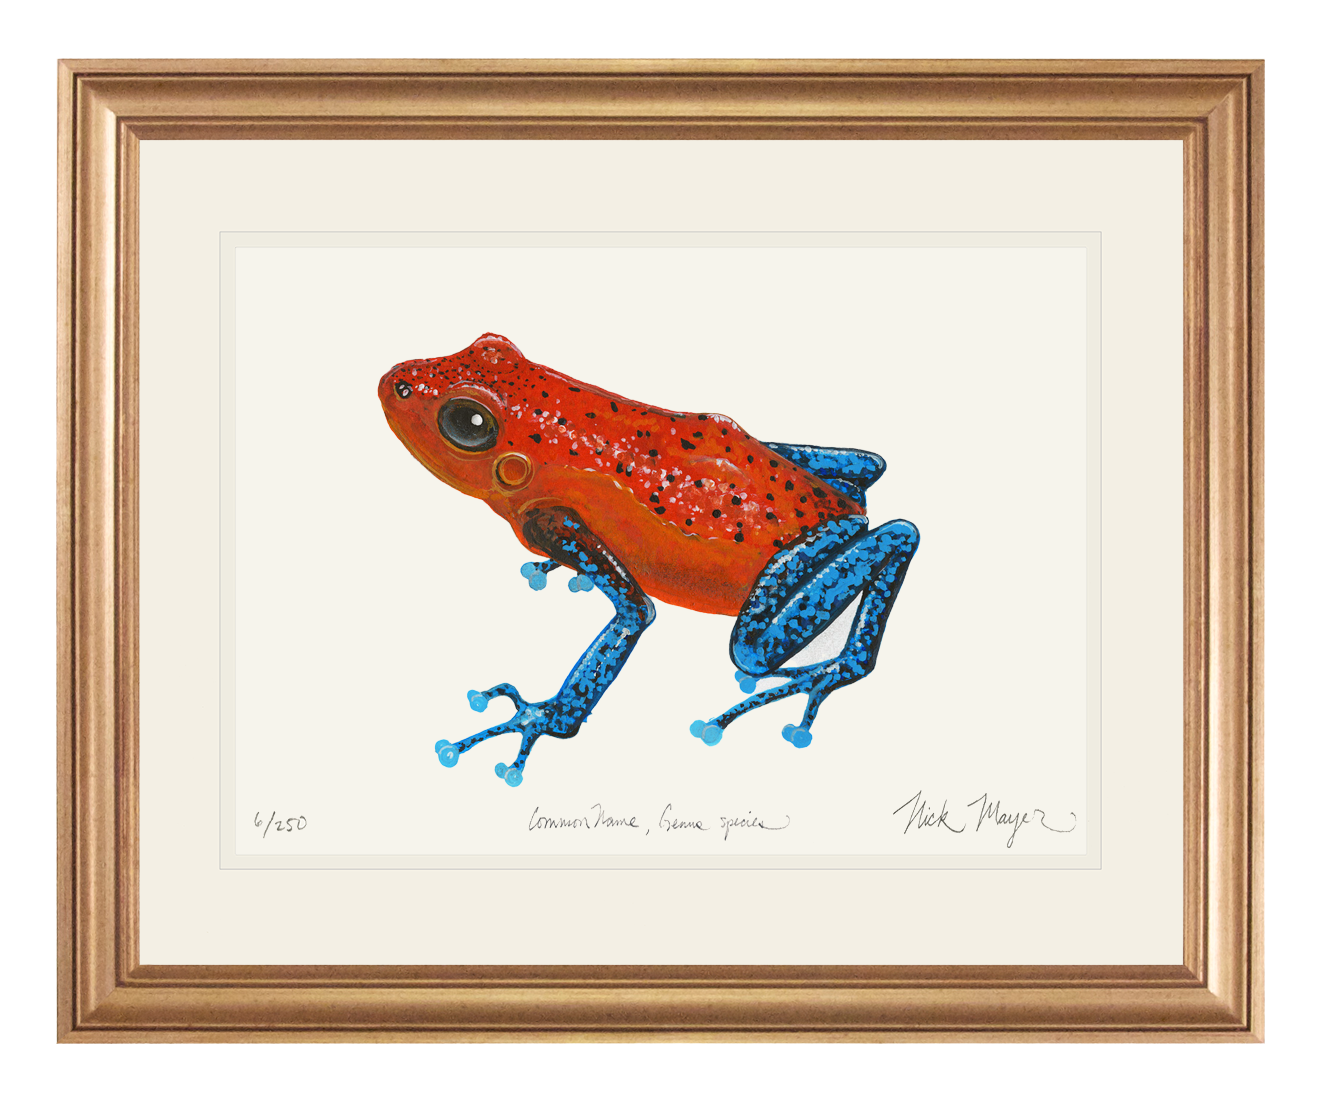 Strawberry Poison Dart Frog Original Watercolor Painting